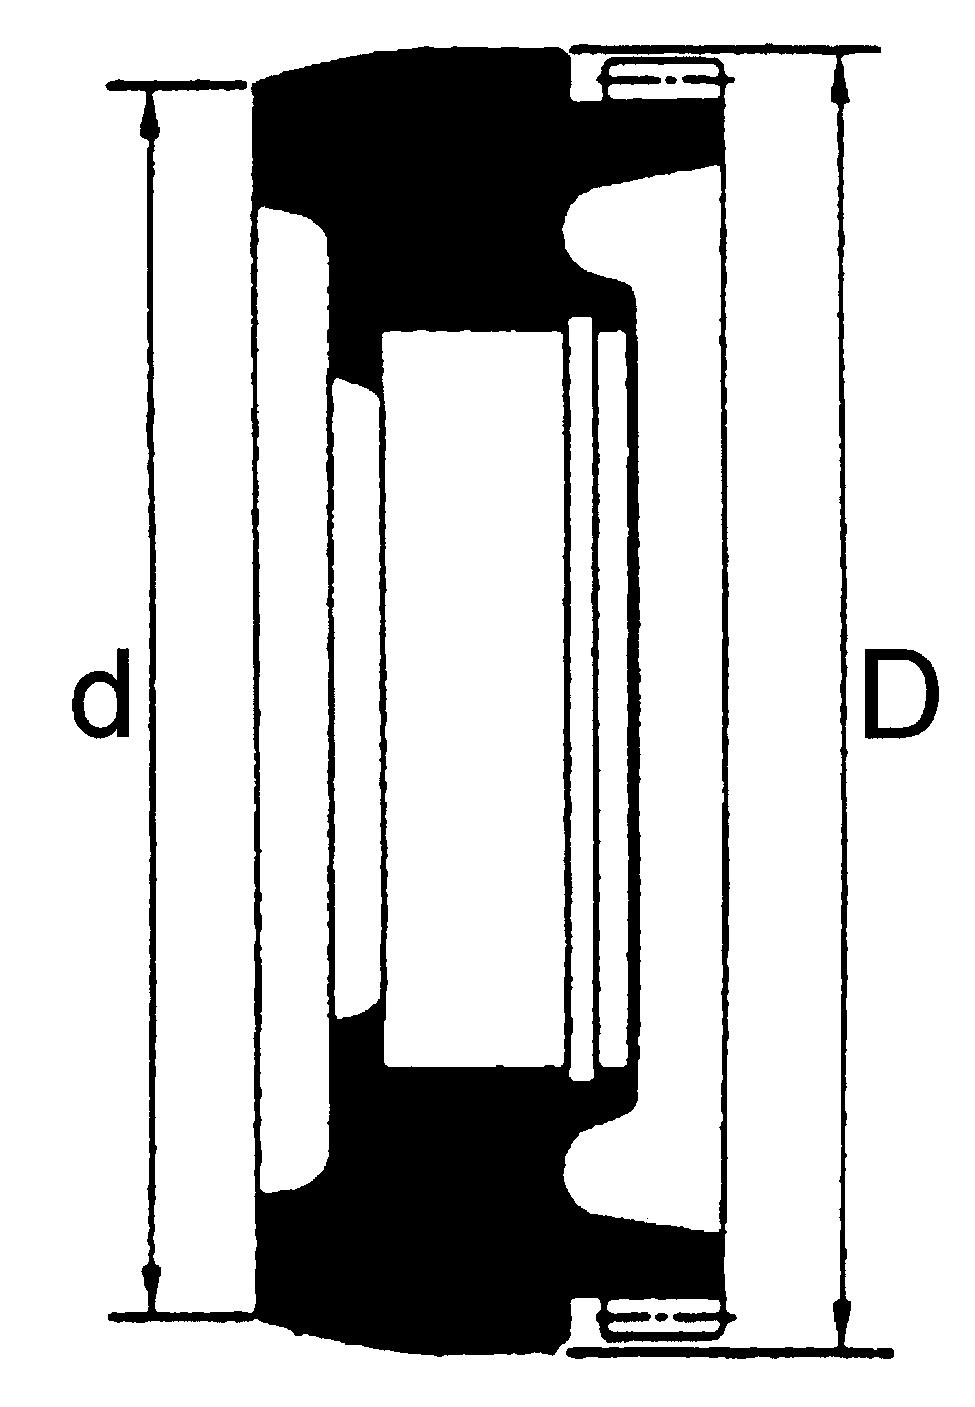 Table 5-4 Track Wheel Wear Dimensions Trolley Code Note: Track wheels are for flat and tapered flanges. d Dimension inch (mm) D Dimension inch (mm) Standard Discard Standard Discard MCR1000 3.60 (91.